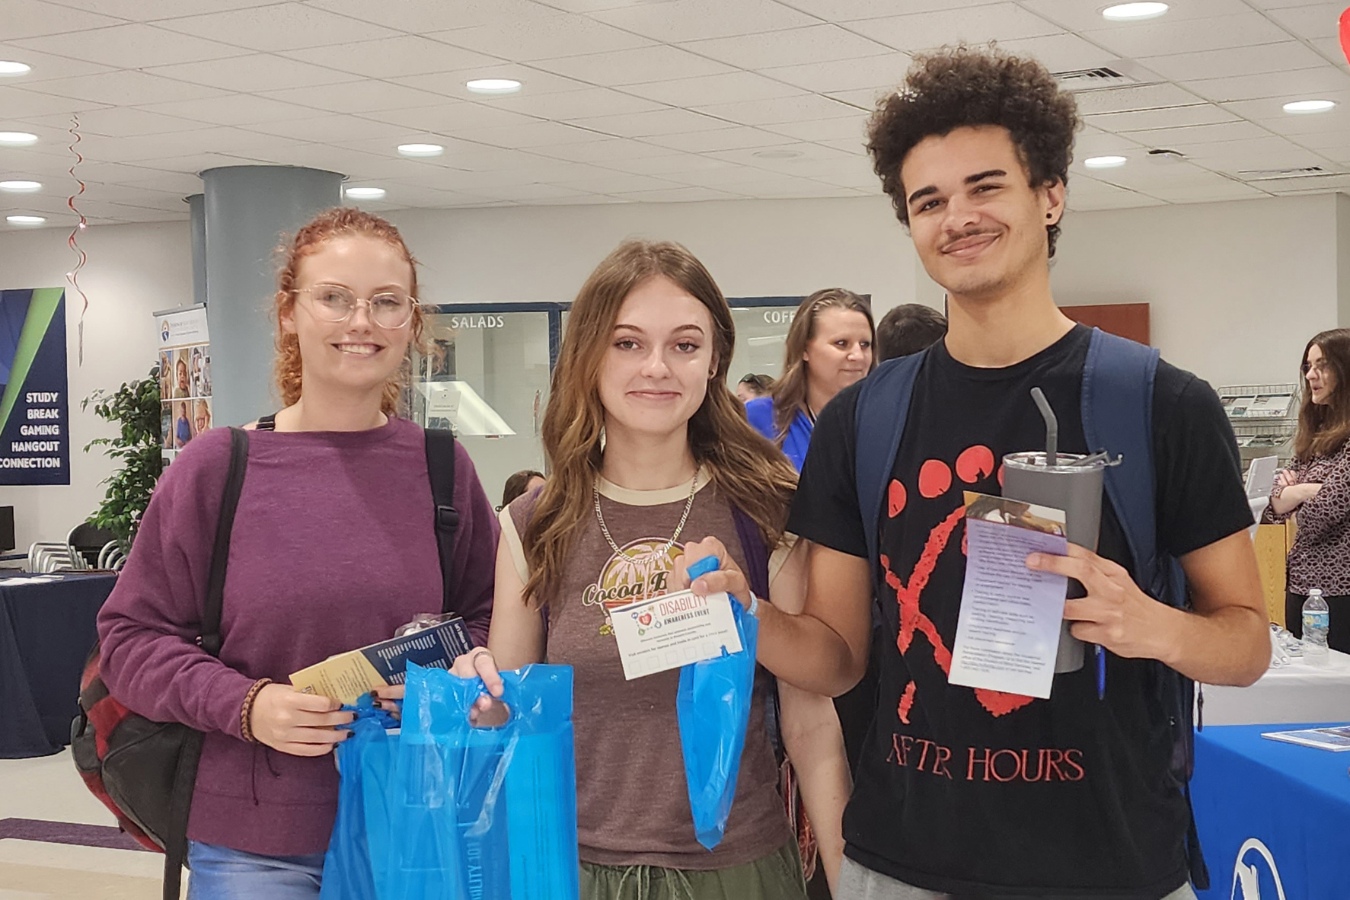 A cheerful group of students at an on-campus event, proudly posing with their EFSC swag bags.